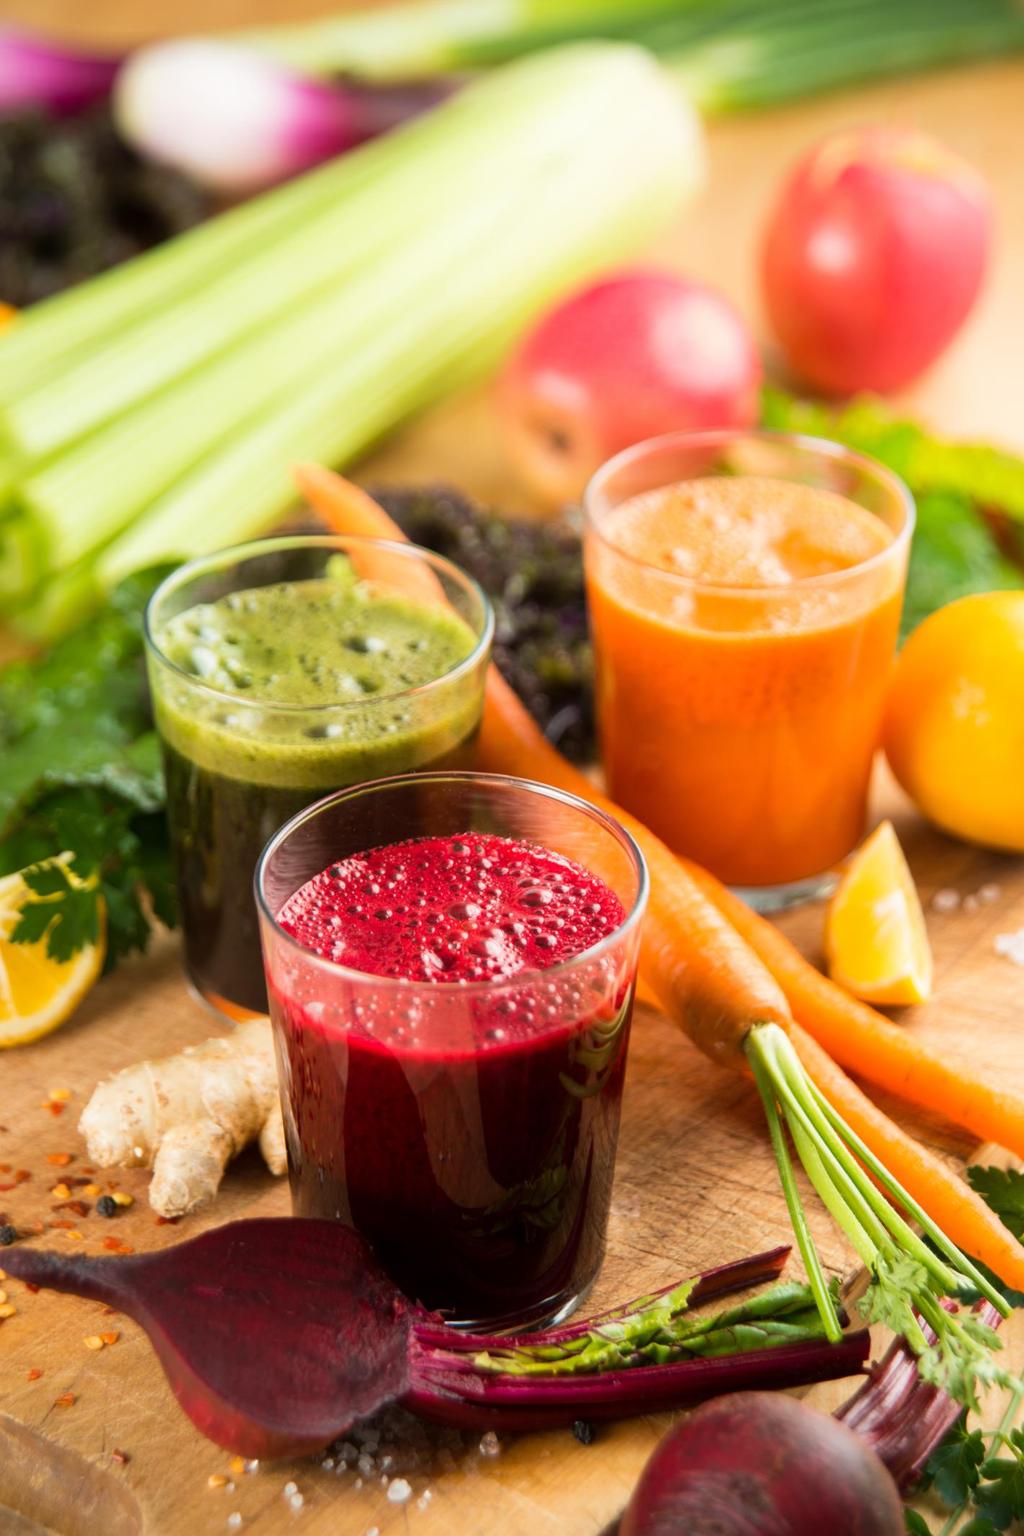 Detox Your Body Spring is a very popular time of year to participate in a Detox. You might choose to participate in a whole foods detox, or to simply reevaluate your eating habits.